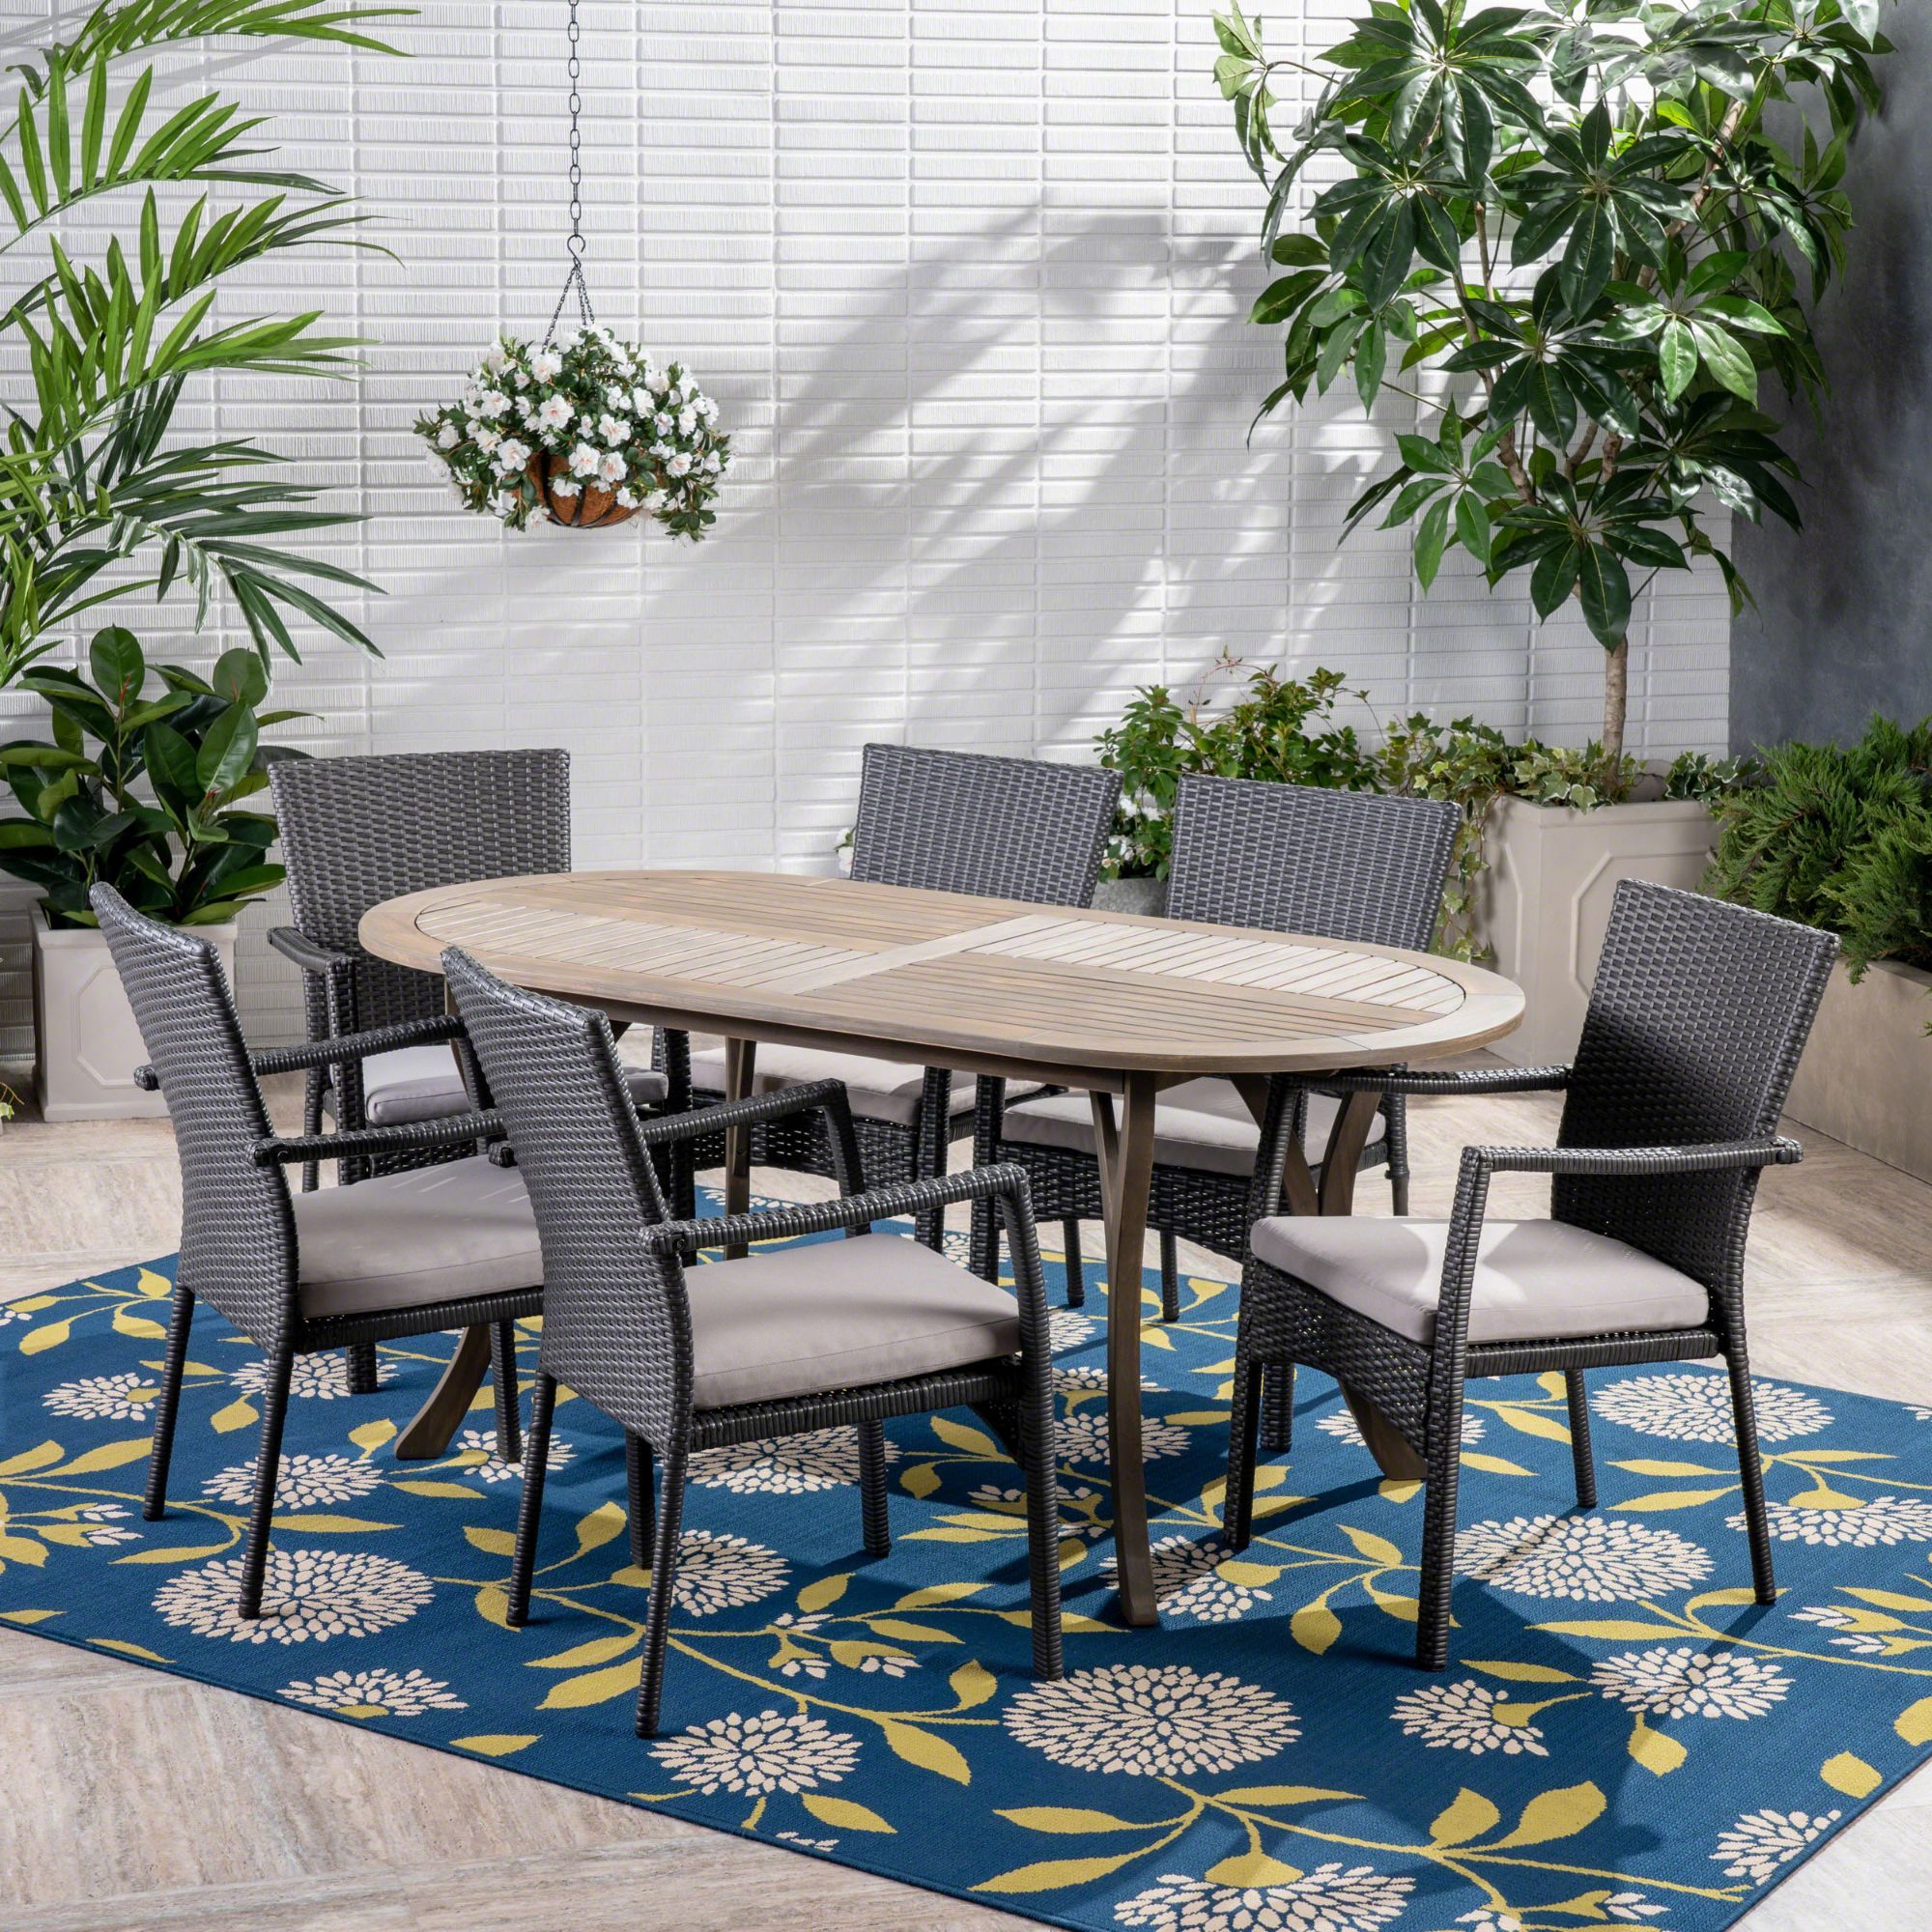 7 Piece Contemporary Outdoor Furniture Patio Dining Set – Gray Cushions Pertaining To Well Liked 7 Piece Patio Dining Sets (View 1 of 15)